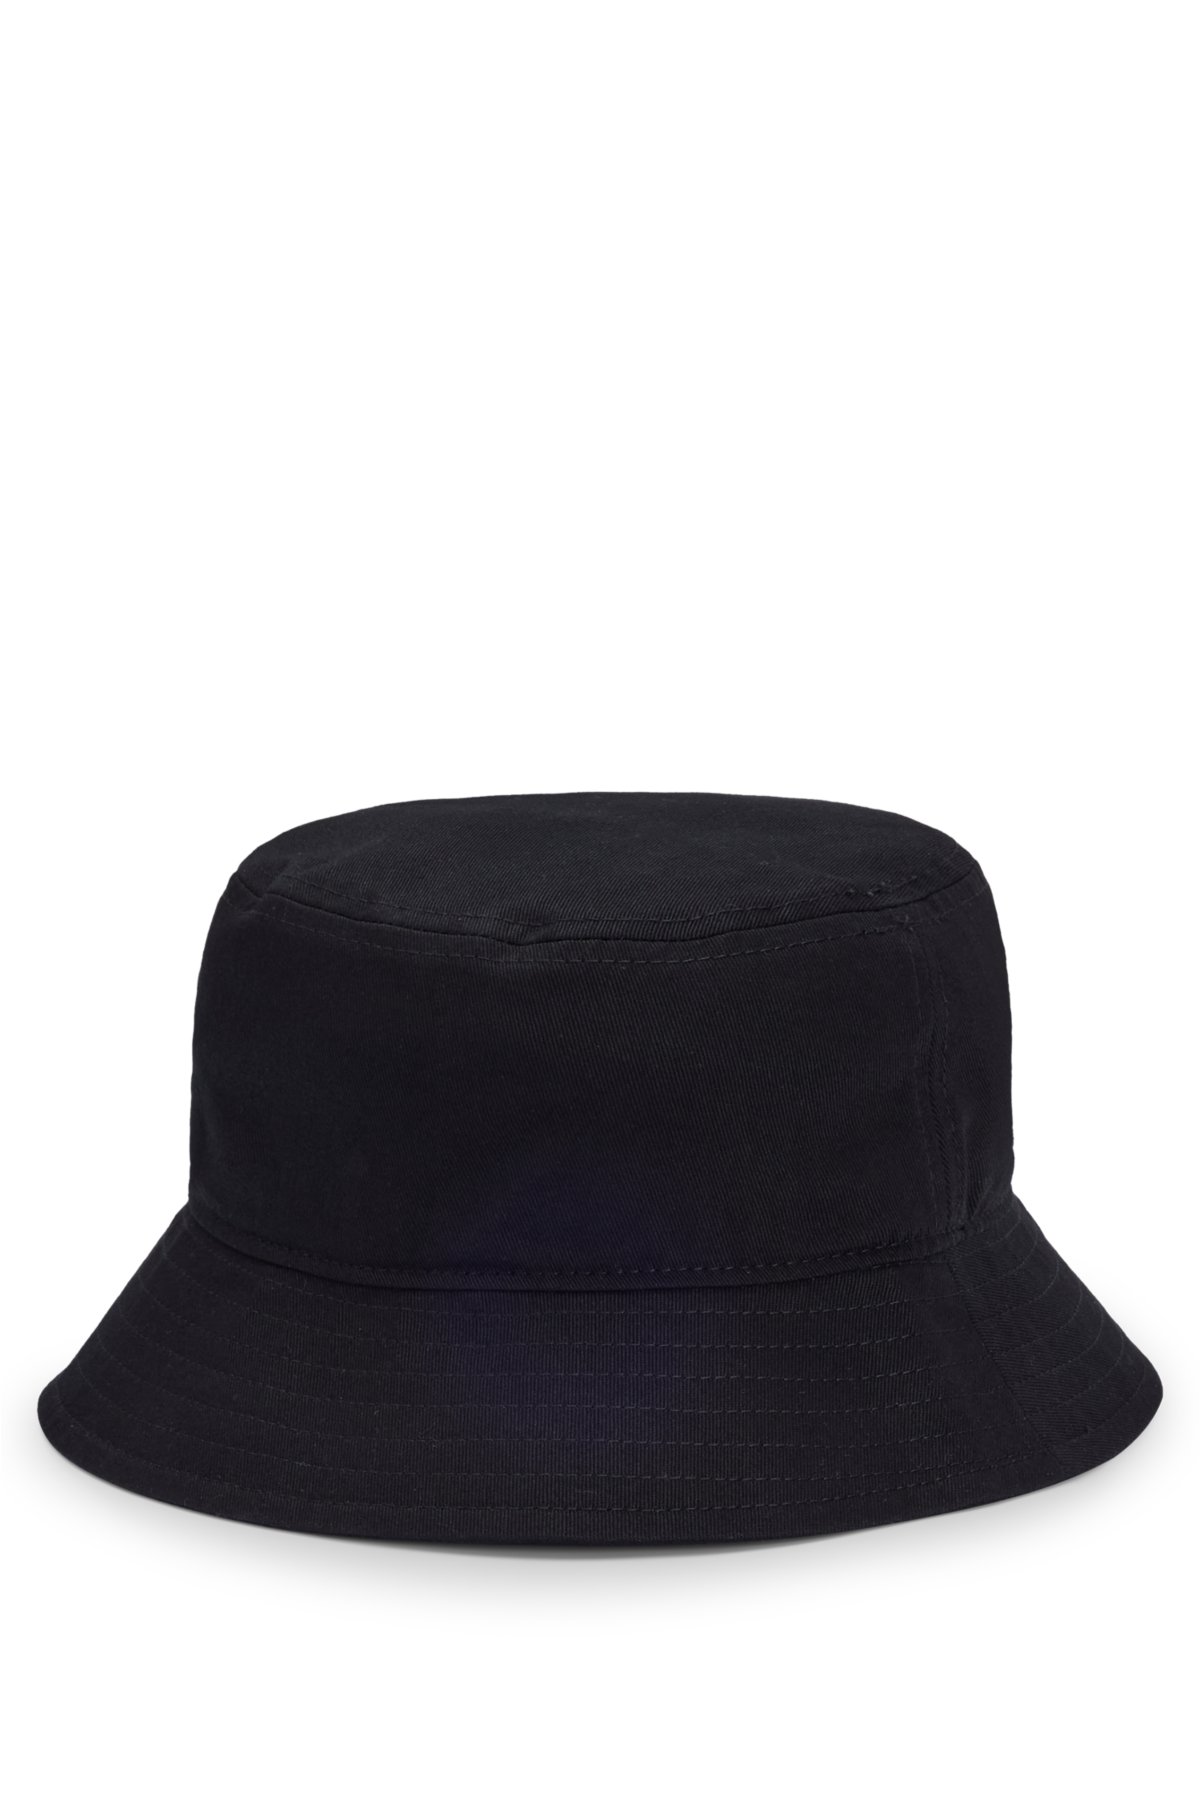 Kids' bucket hat in cotton twill with rubber logo, Black